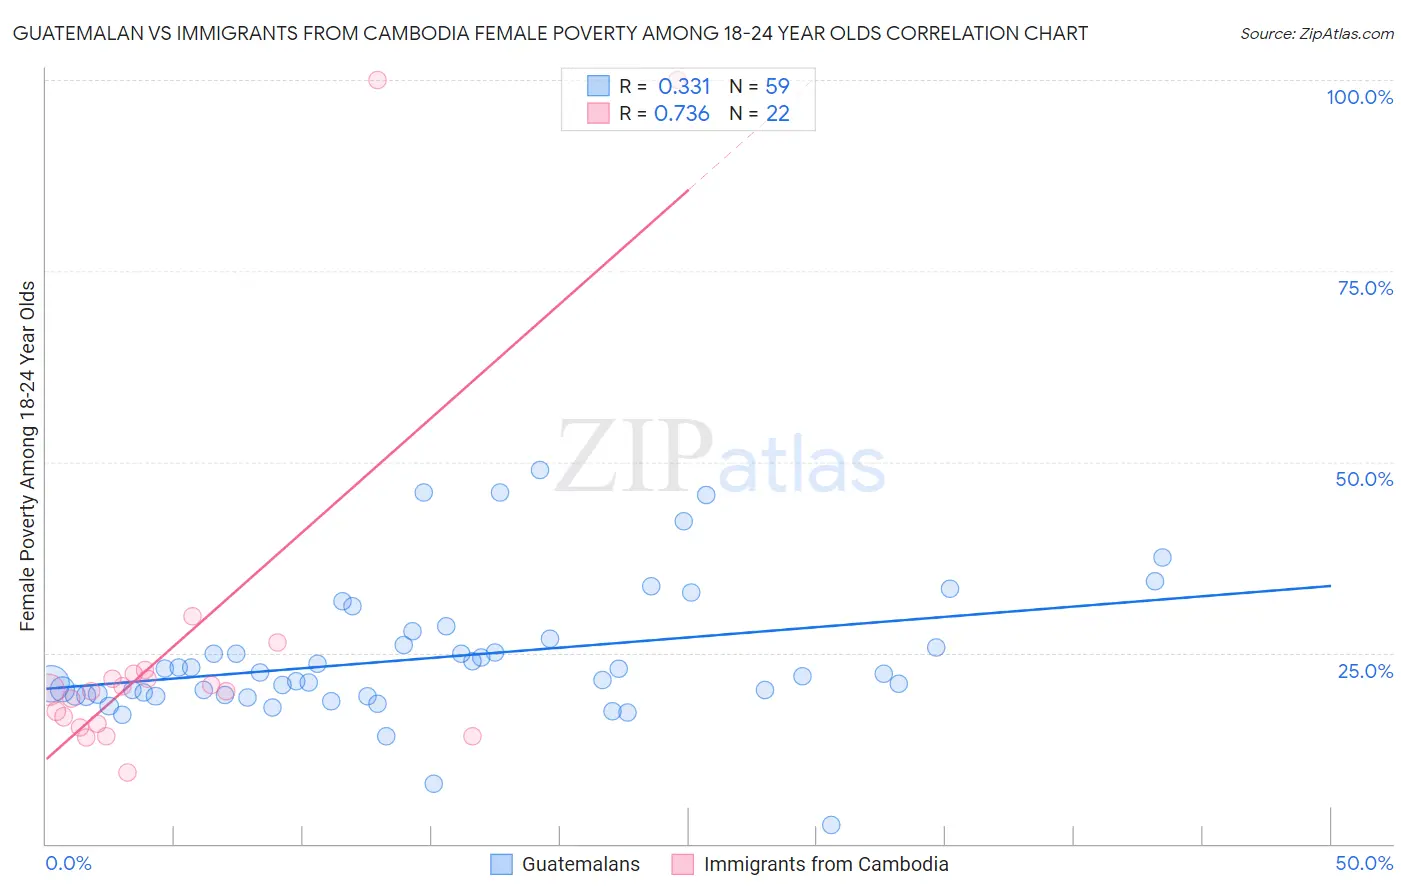 Guatemalan vs Immigrants from Cambodia Female Poverty Among 18-24 Year Olds